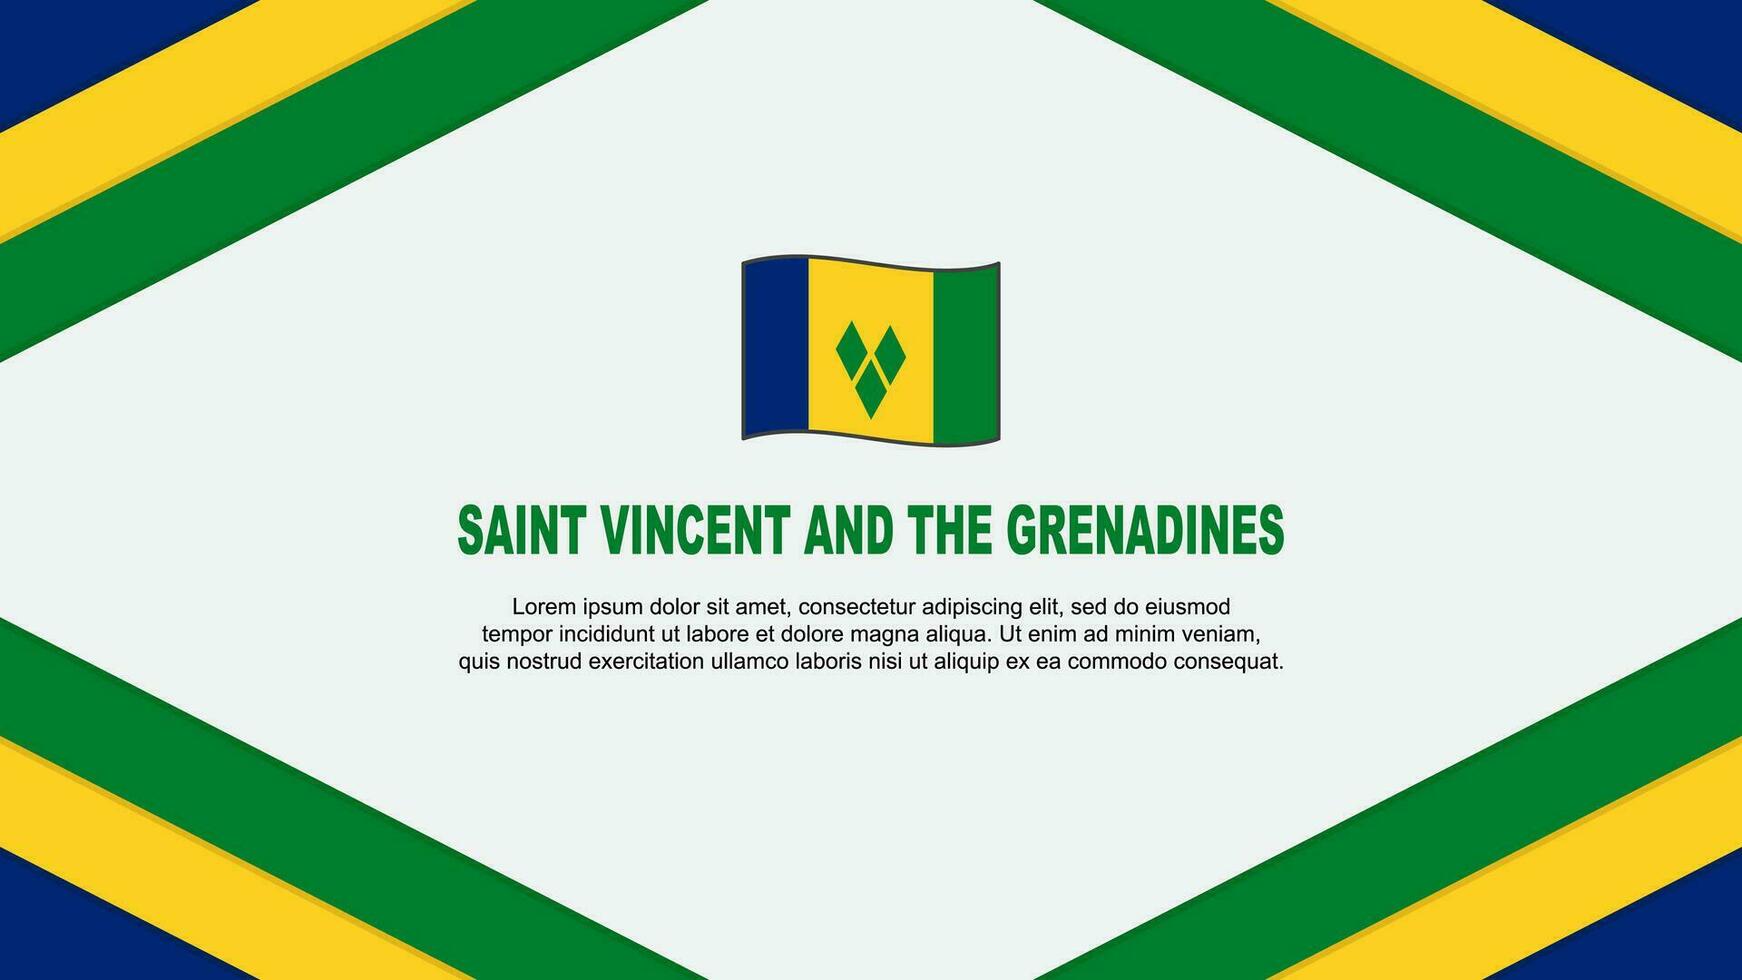 Saint Vincent And The Grenadines Flag Abstract Background Design Template. Saint Vincent And The Grenadines Independence Day Banner Cartoon Vector Illustration. Template